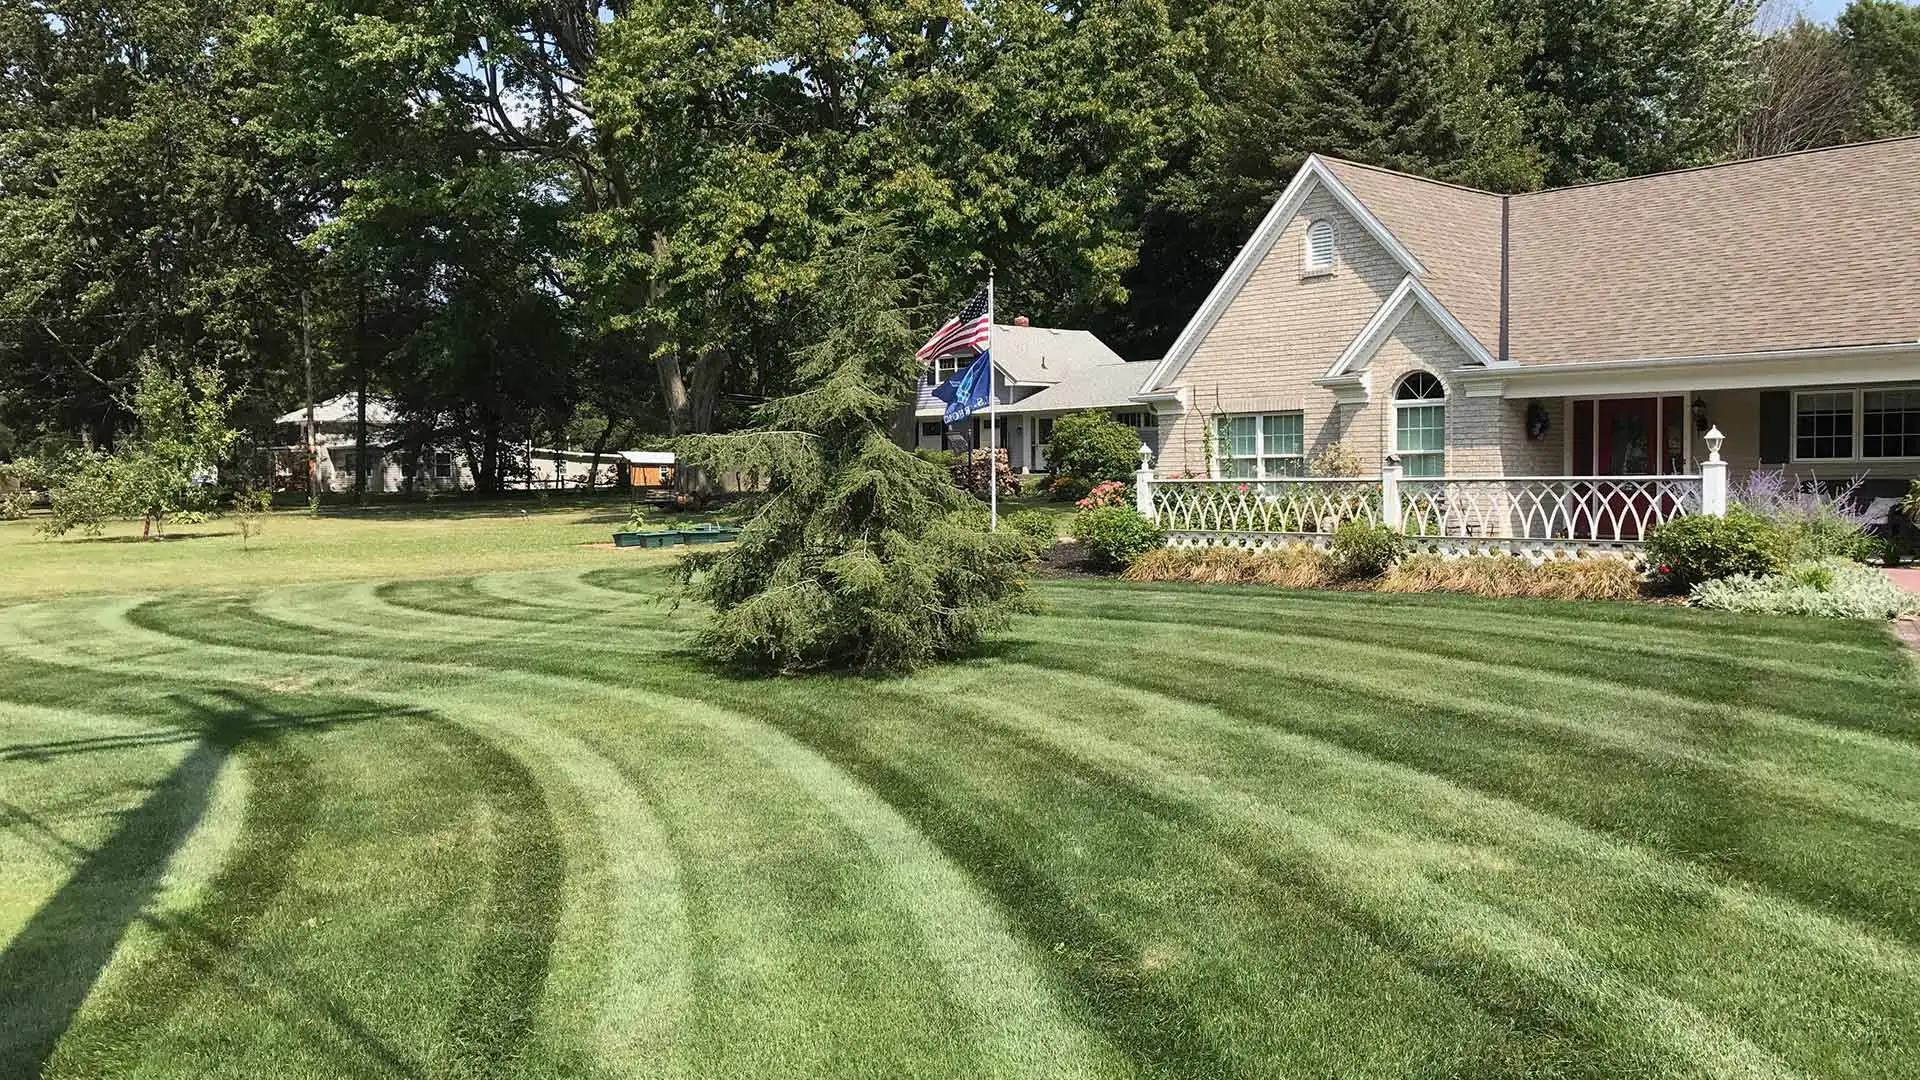 Mowing stripes in a well-maintained Geneva lawn.